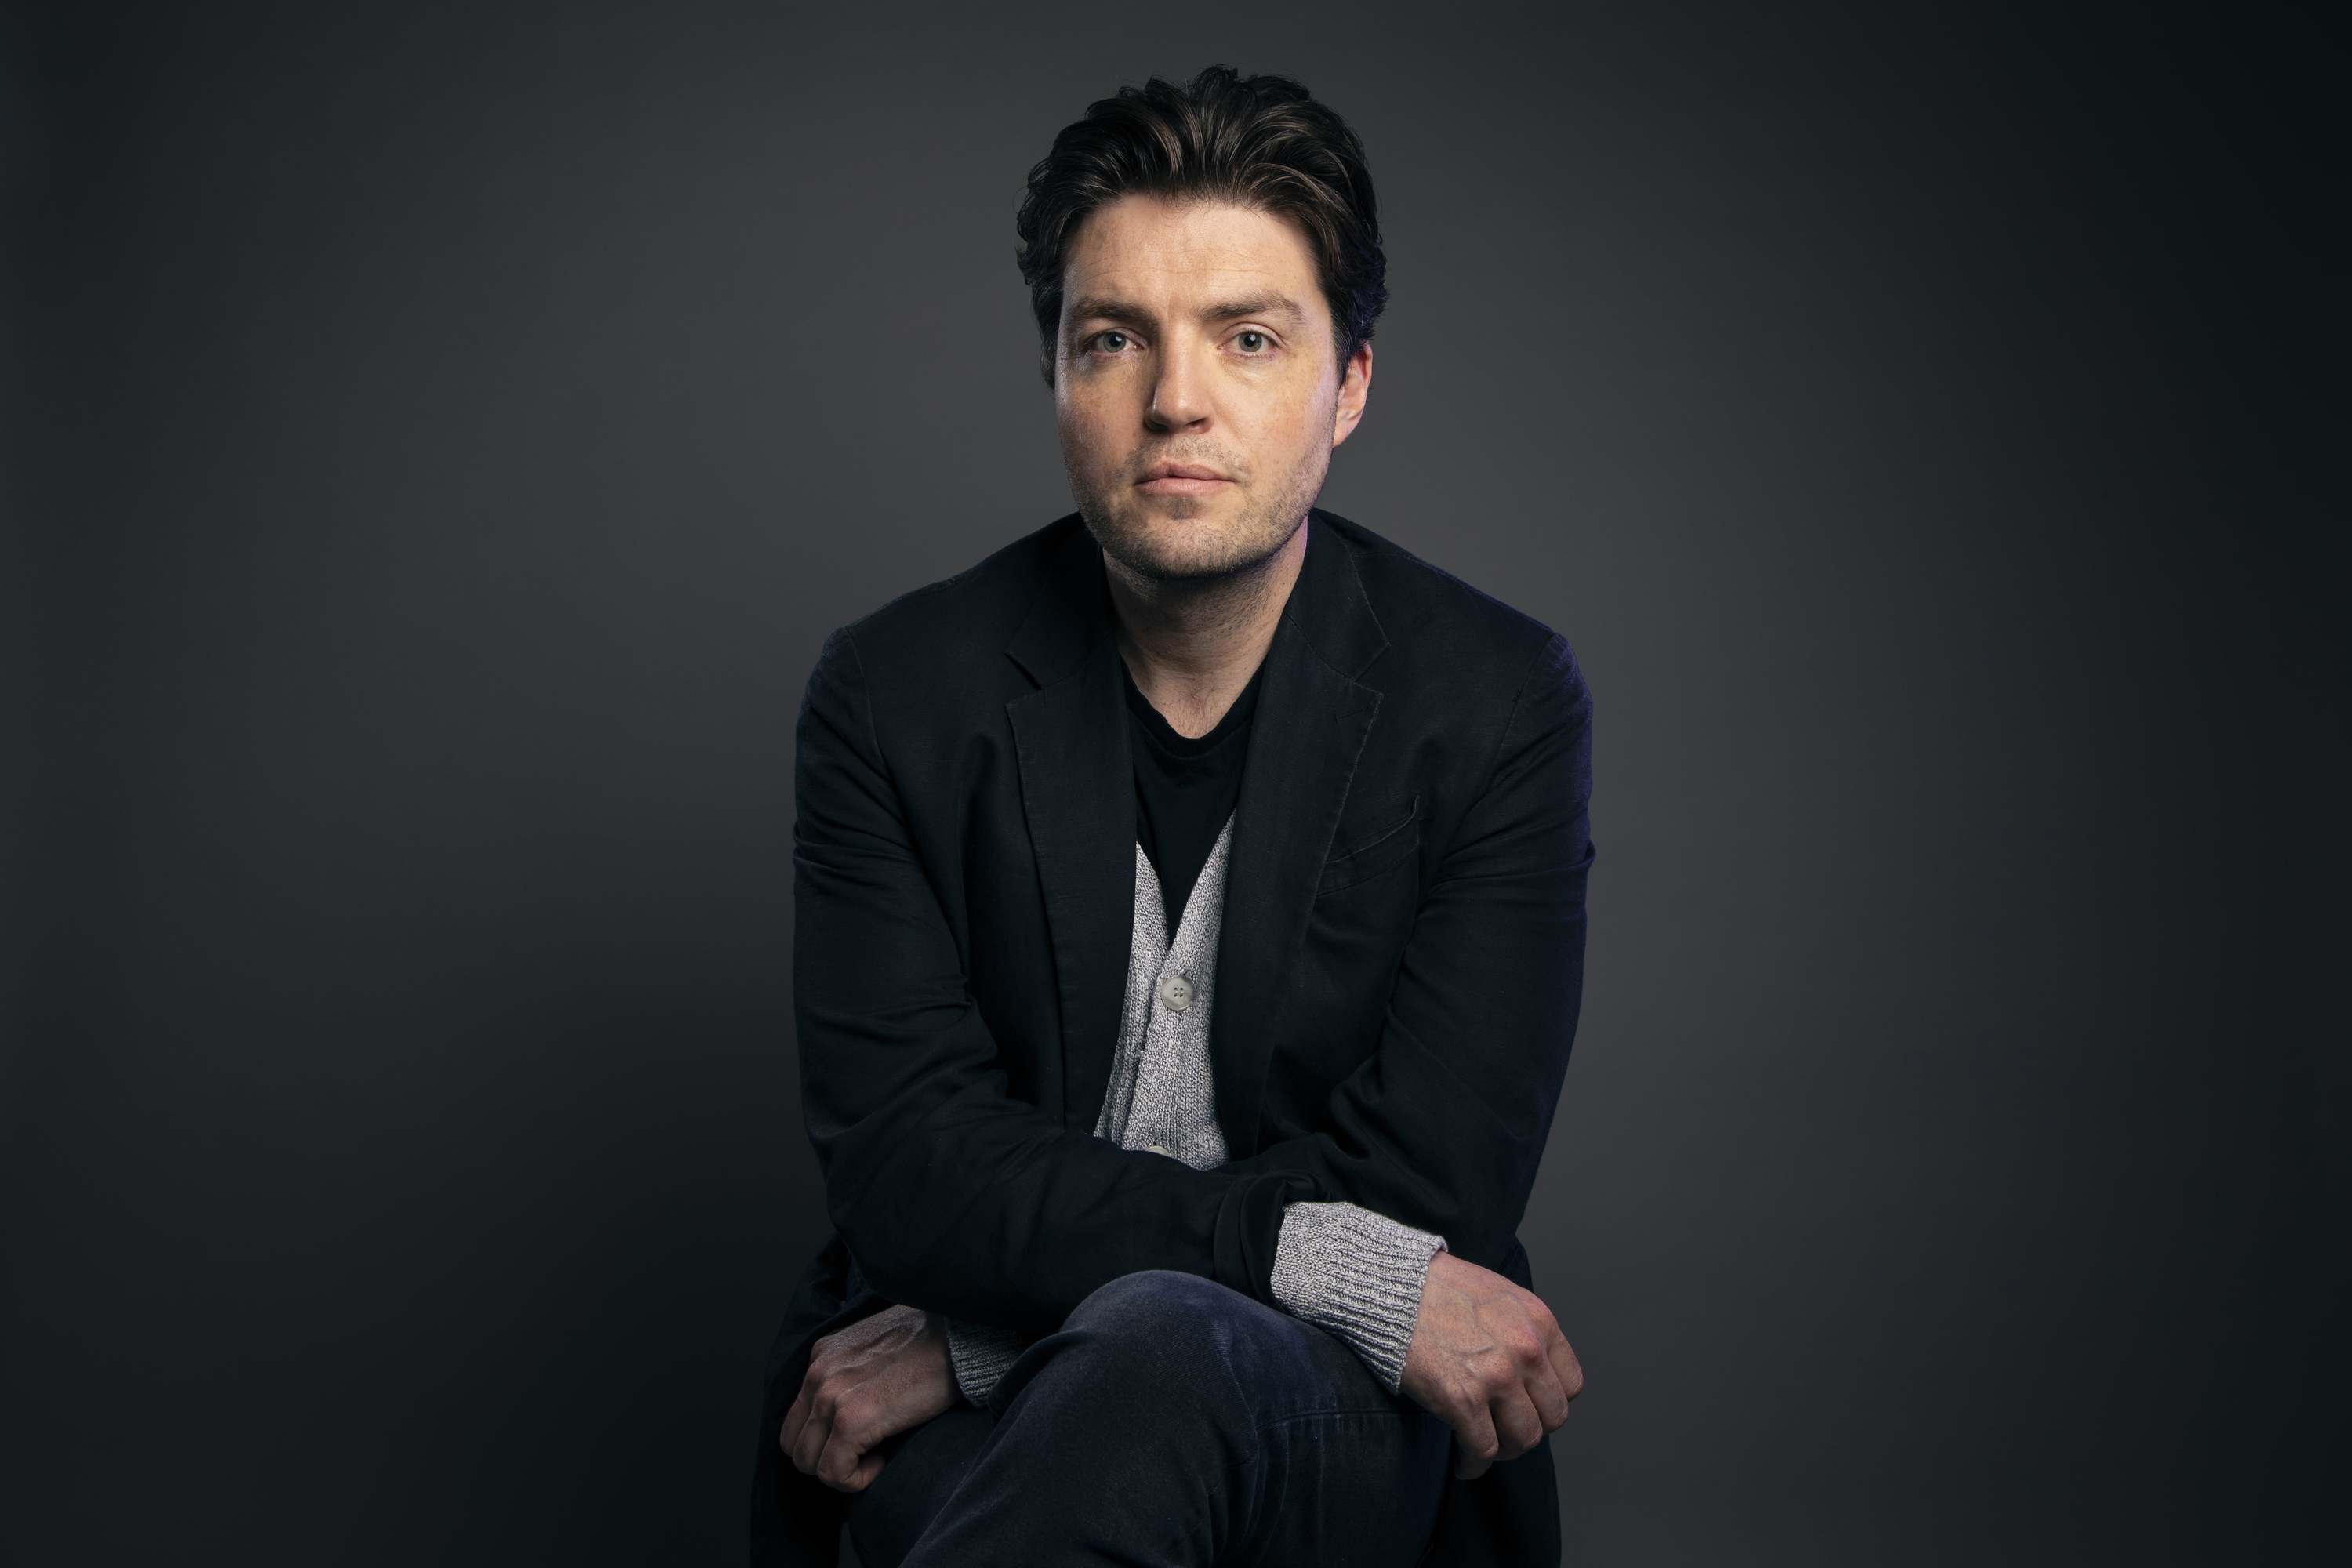 Tom Burke On The Souvenir, Strike and Learning From Alan Rickman